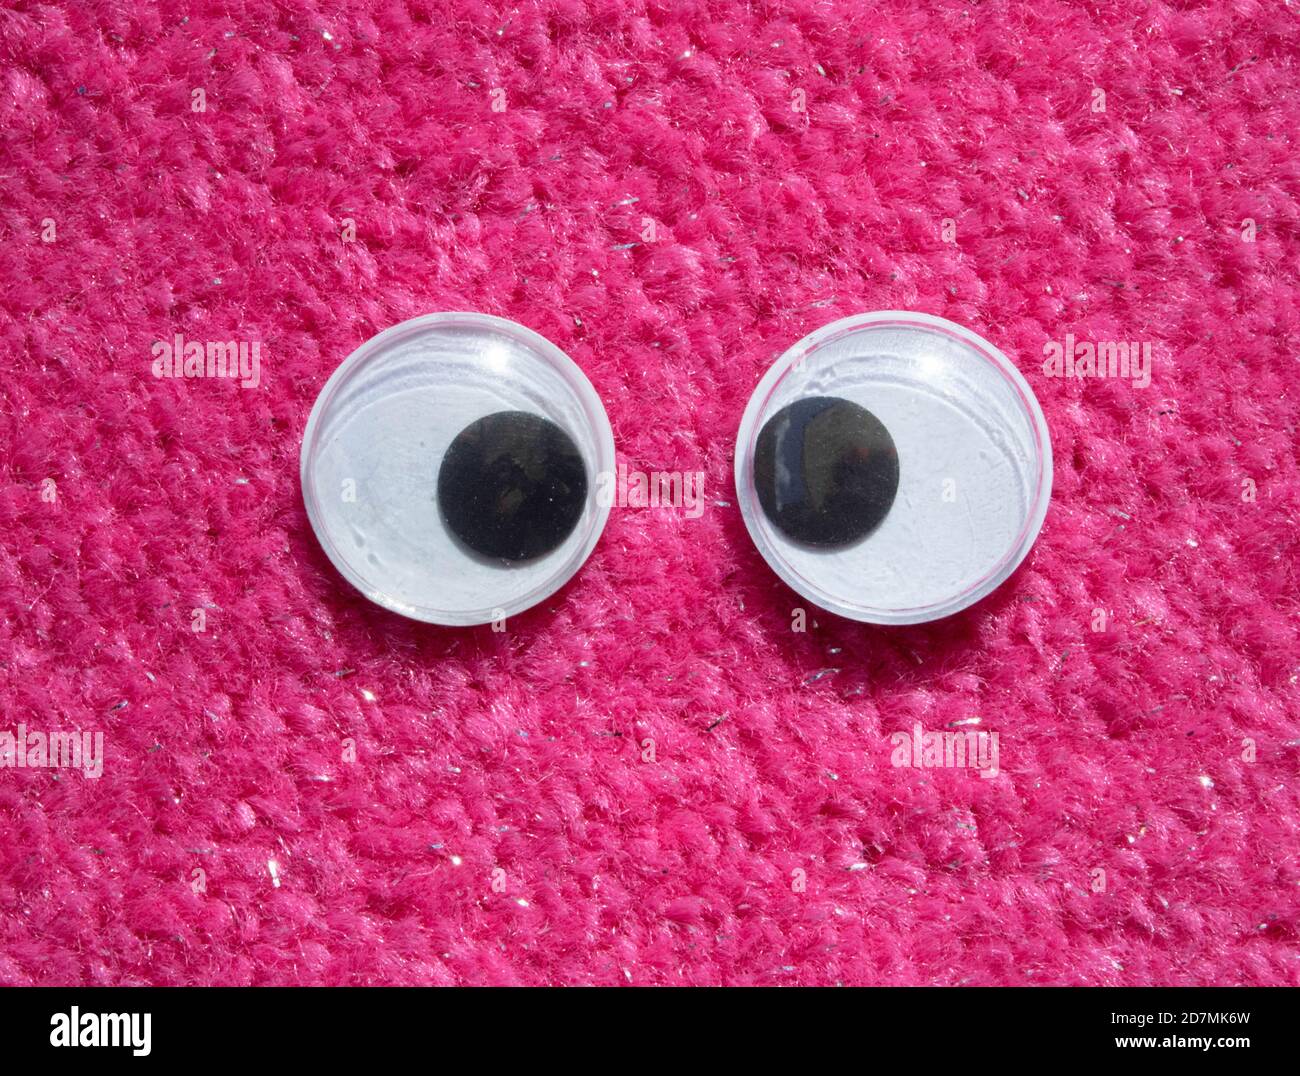 Funny Wiggle Google Eyes on Fabric Silly Fur Carpet Background Stock Photo  - Alamy